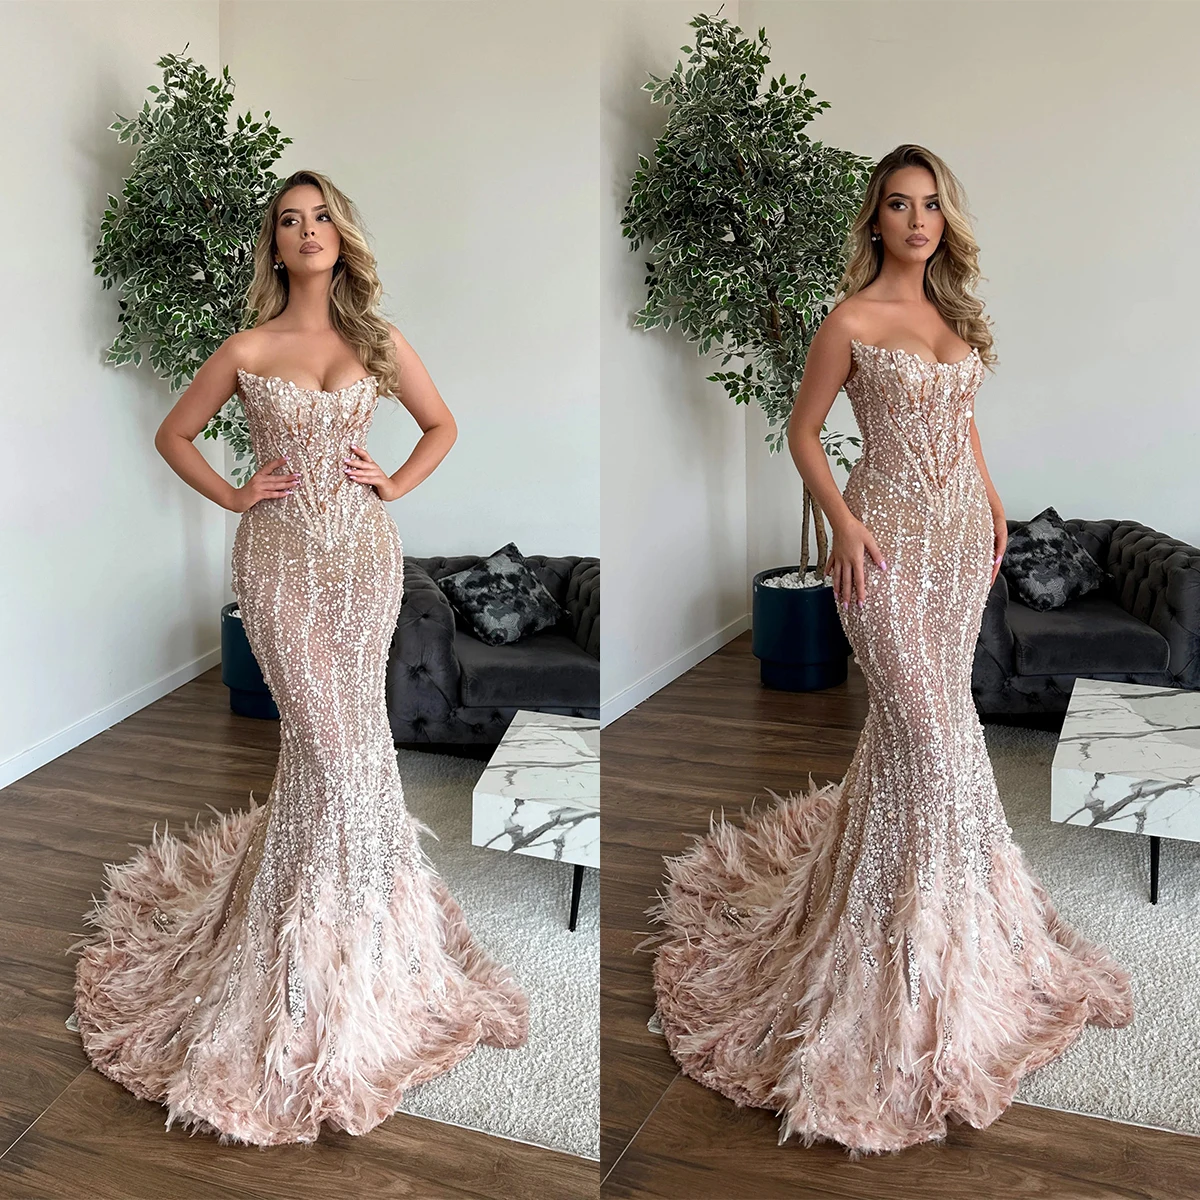 

Charming Evening Dresses Mermaid Strapless Sequined Applique Feathers Court Gown Backless Prom Dress Vestido De Noite Customized